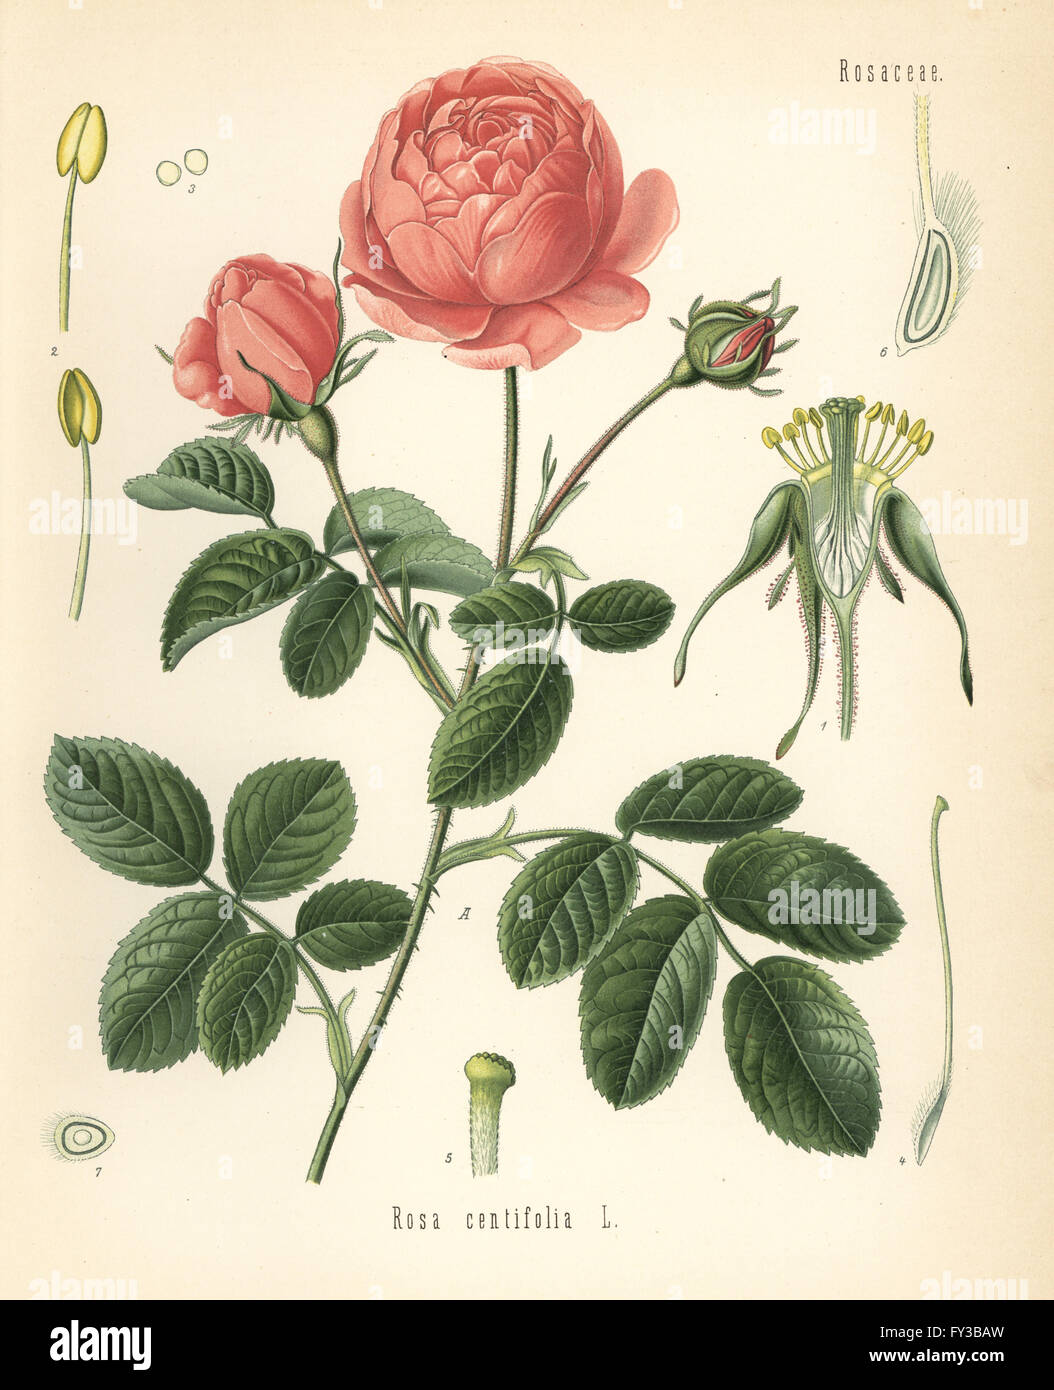 Pale rose, Rosa centifolia. Chromolithograph after a botanical illustration from Hermann Adolph Koehler's Medicinal Plants, edited by Gustav Pabst, Koehler, Germany, 1887. Stock Photo